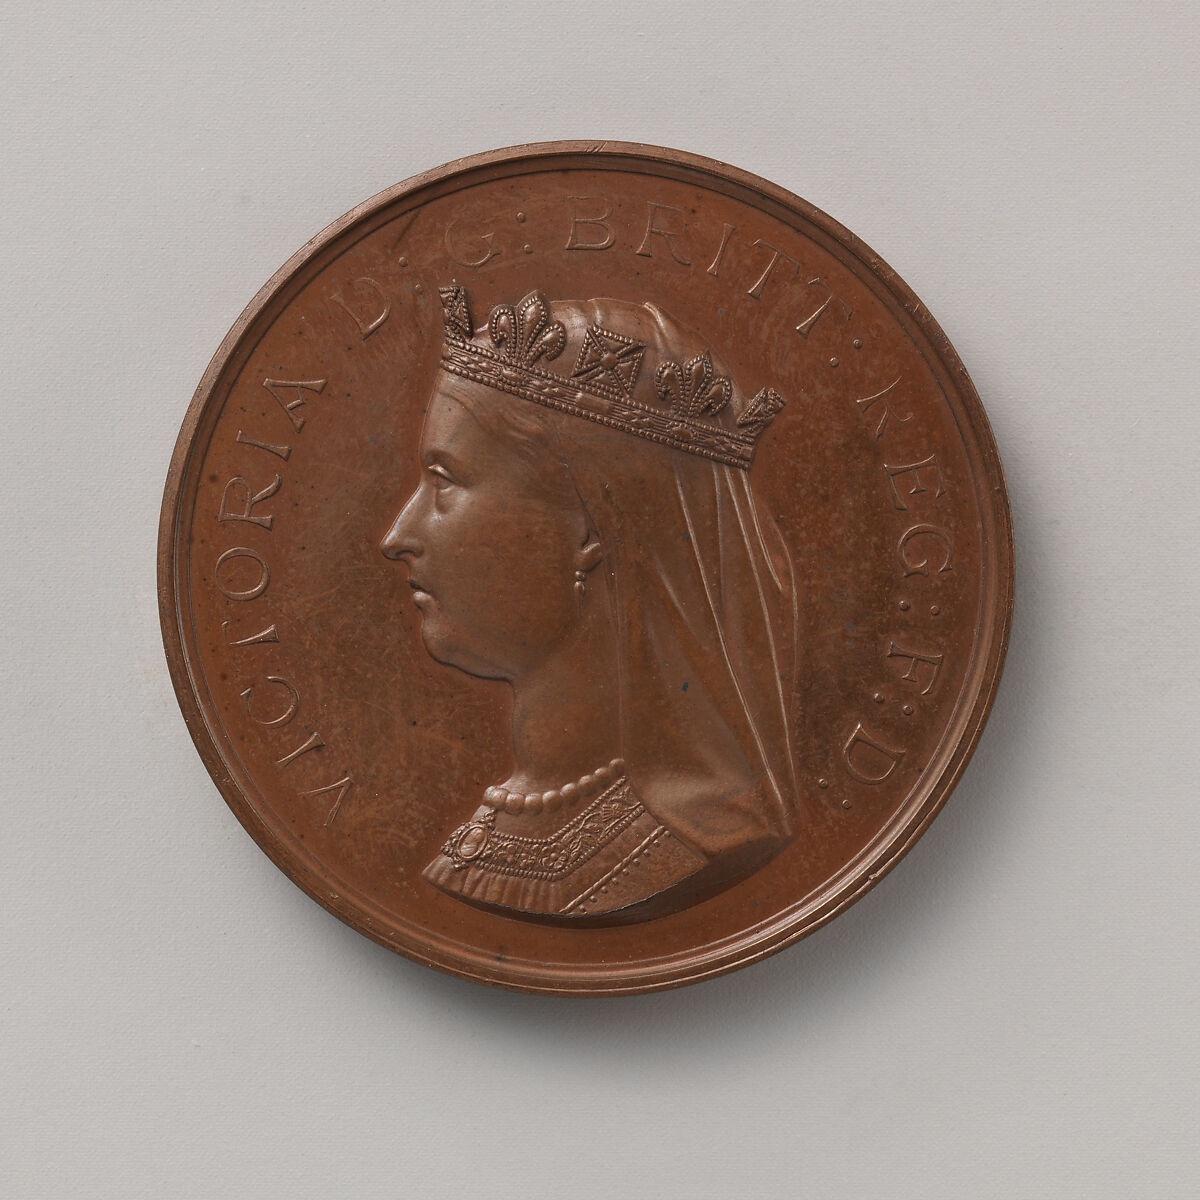 The New Zealand Medal, granted by Queen Victoria, after 1866, to commemorate the campaigns of 1845–1847 and 1860–1866, Medalist: Joseph Edgar Boehm (British (born Austria), Vienna 1834–1890 London), Bronze, British 